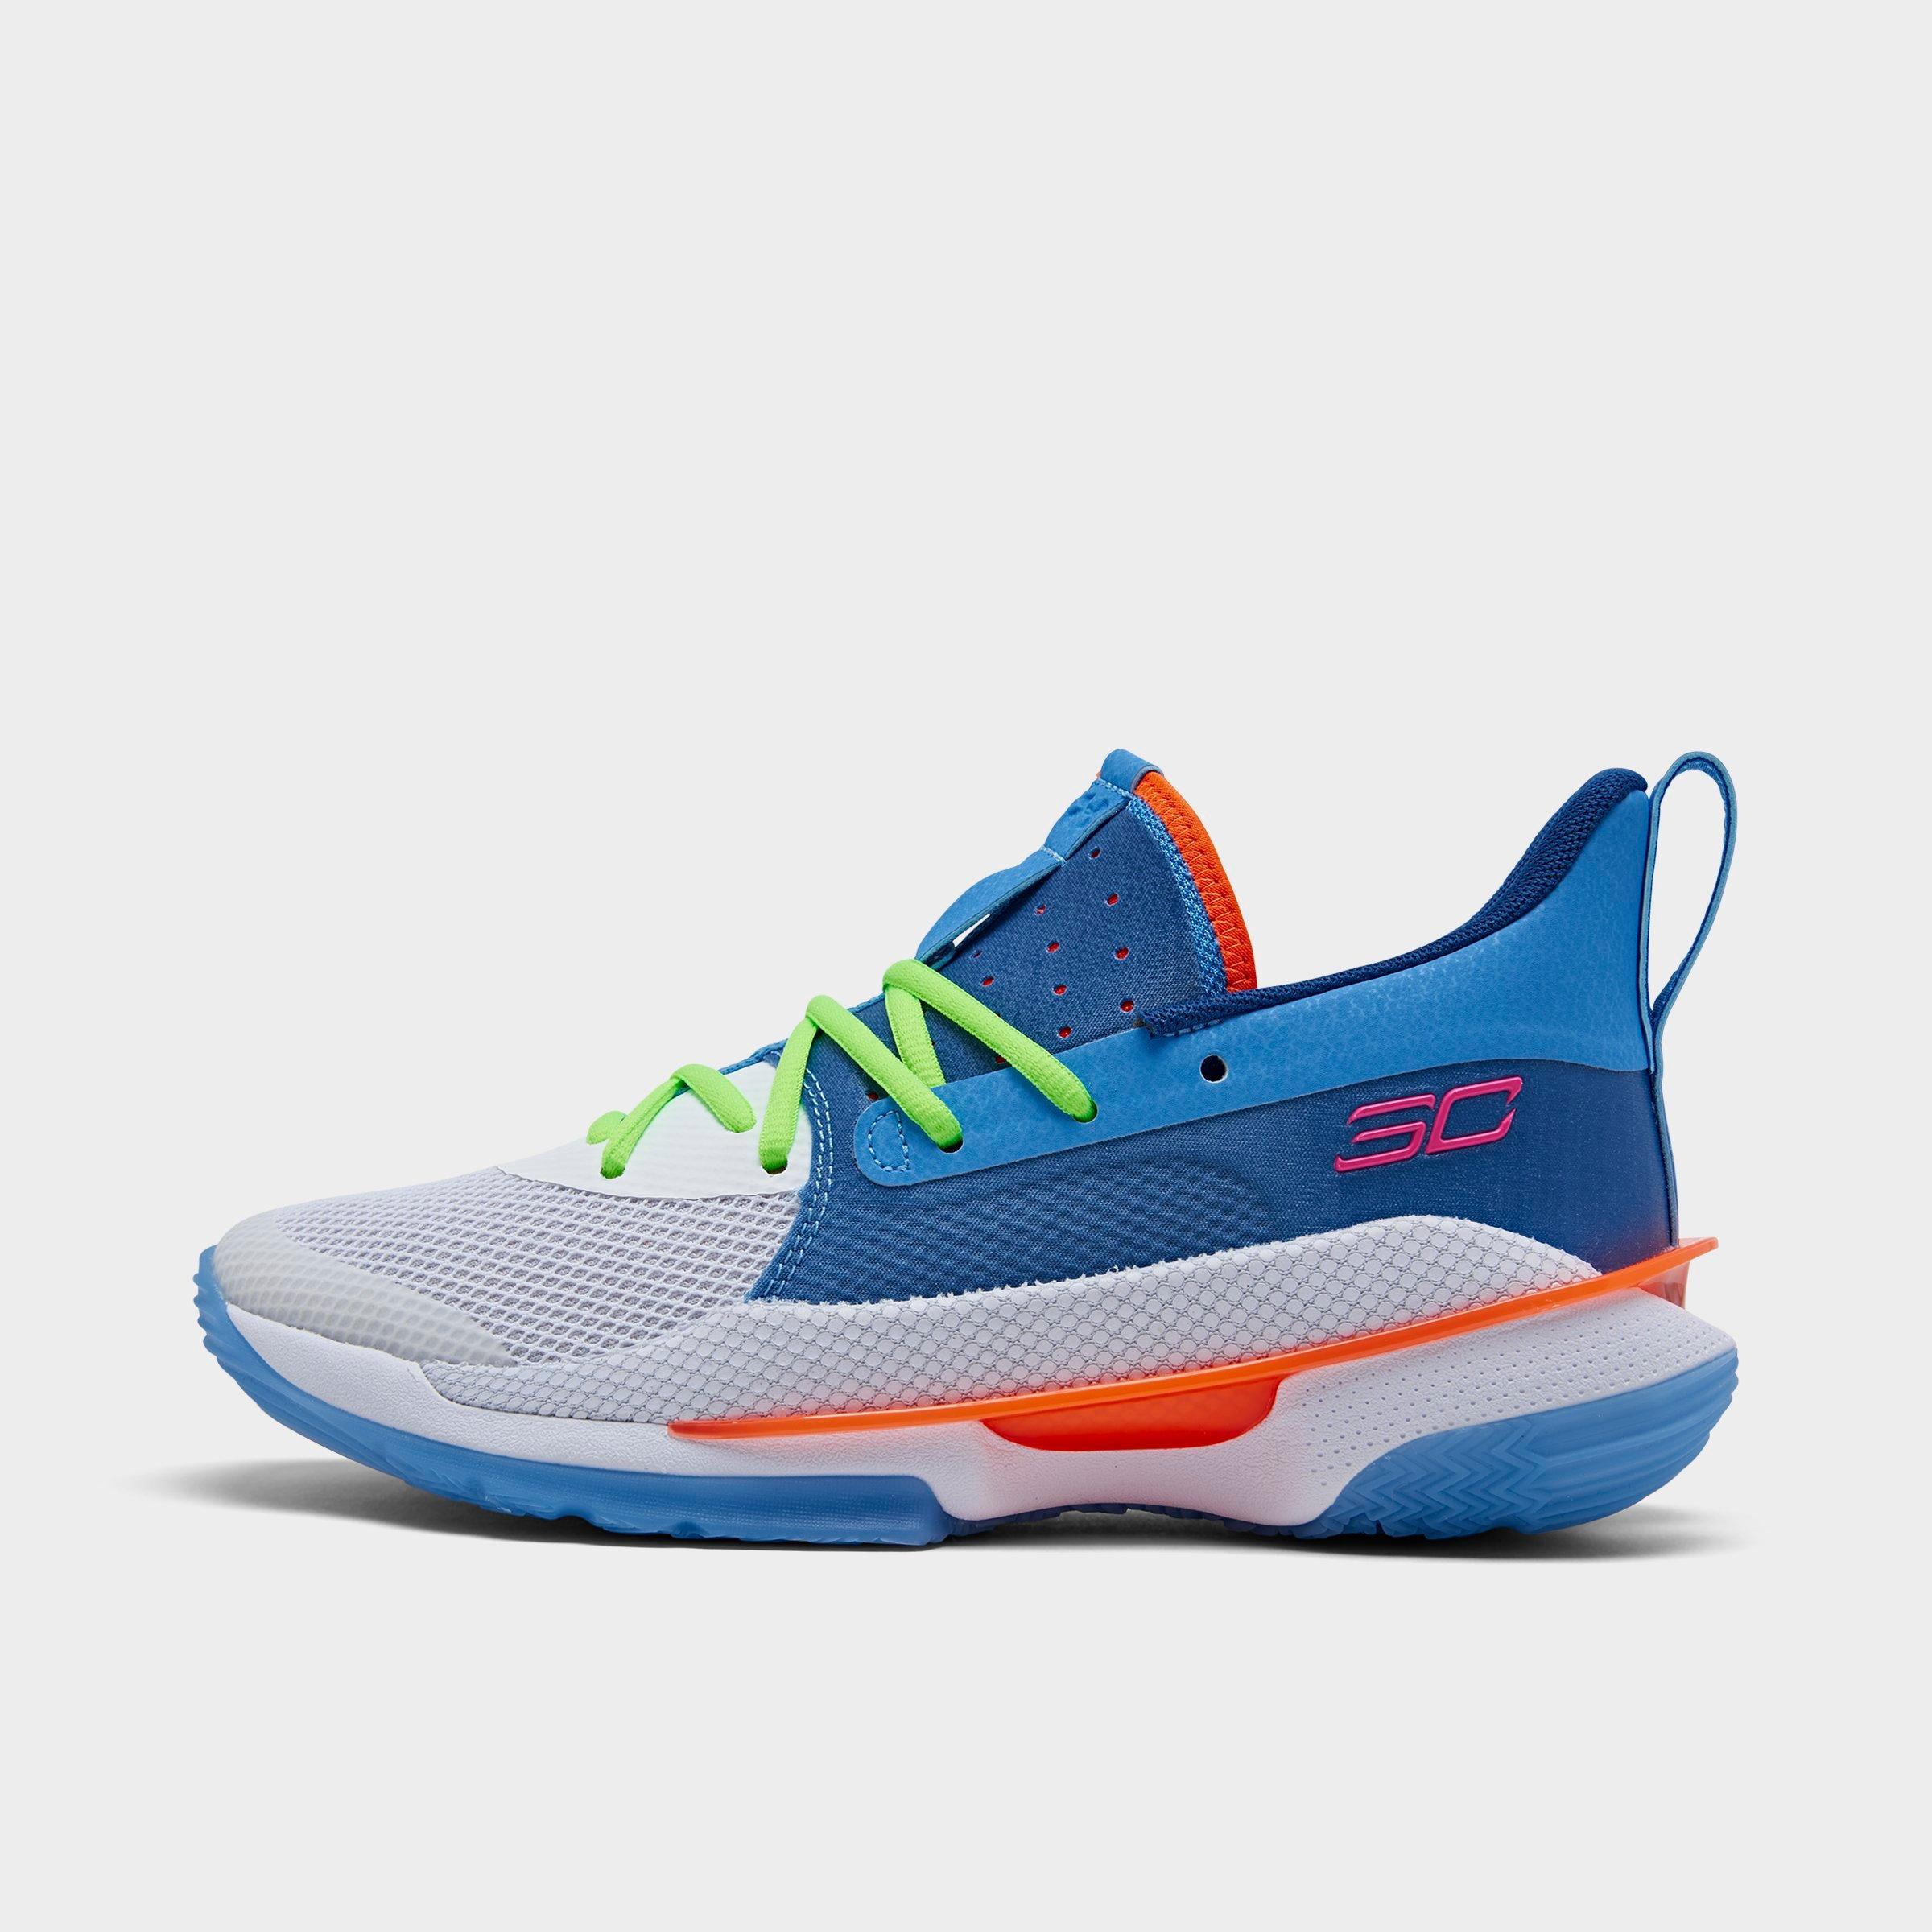 Under Armour Curry 7 Basketball Shoes 